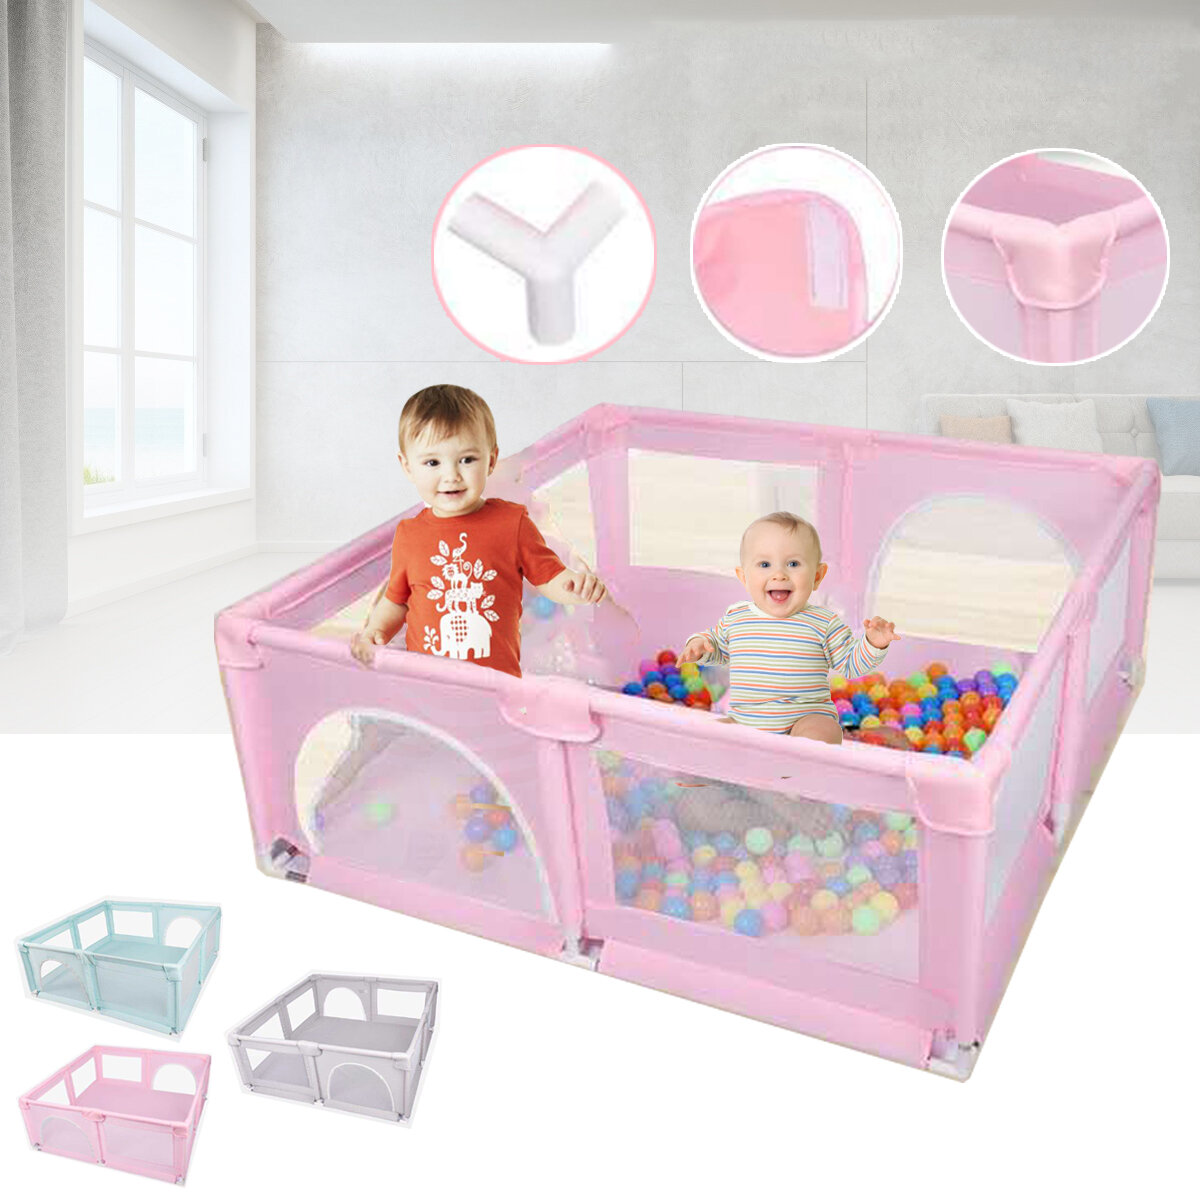 

Playpen Kids Fence Safety Barrier Balls Pit Baby Dry Pool Crawling Playground for Children Playpen